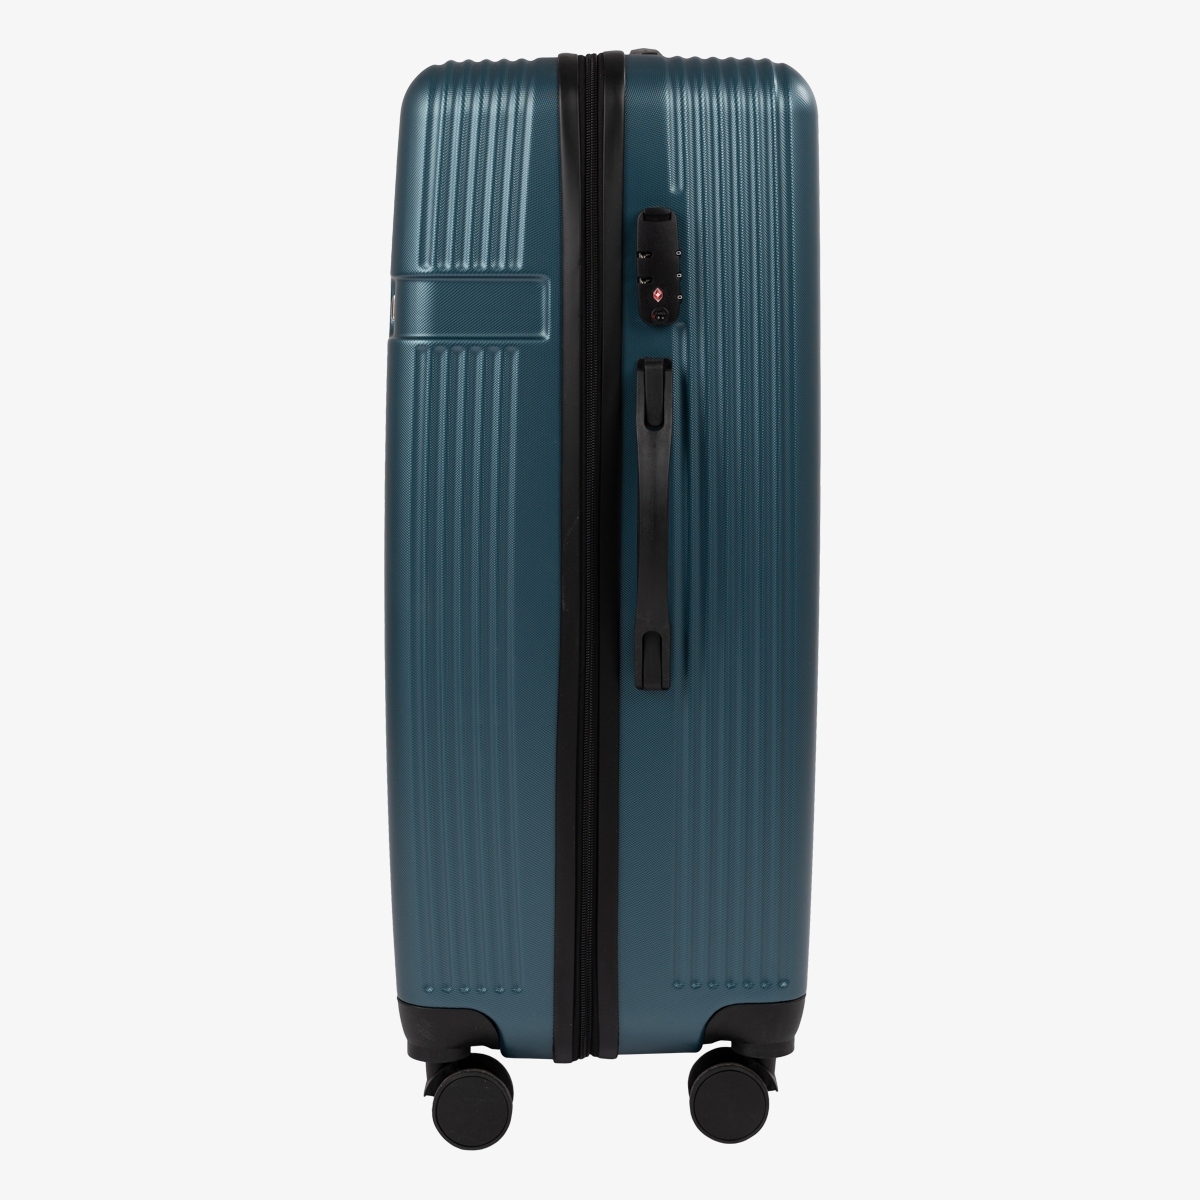 J2C 3 in 1 Hard Suitcase 28 INCH 